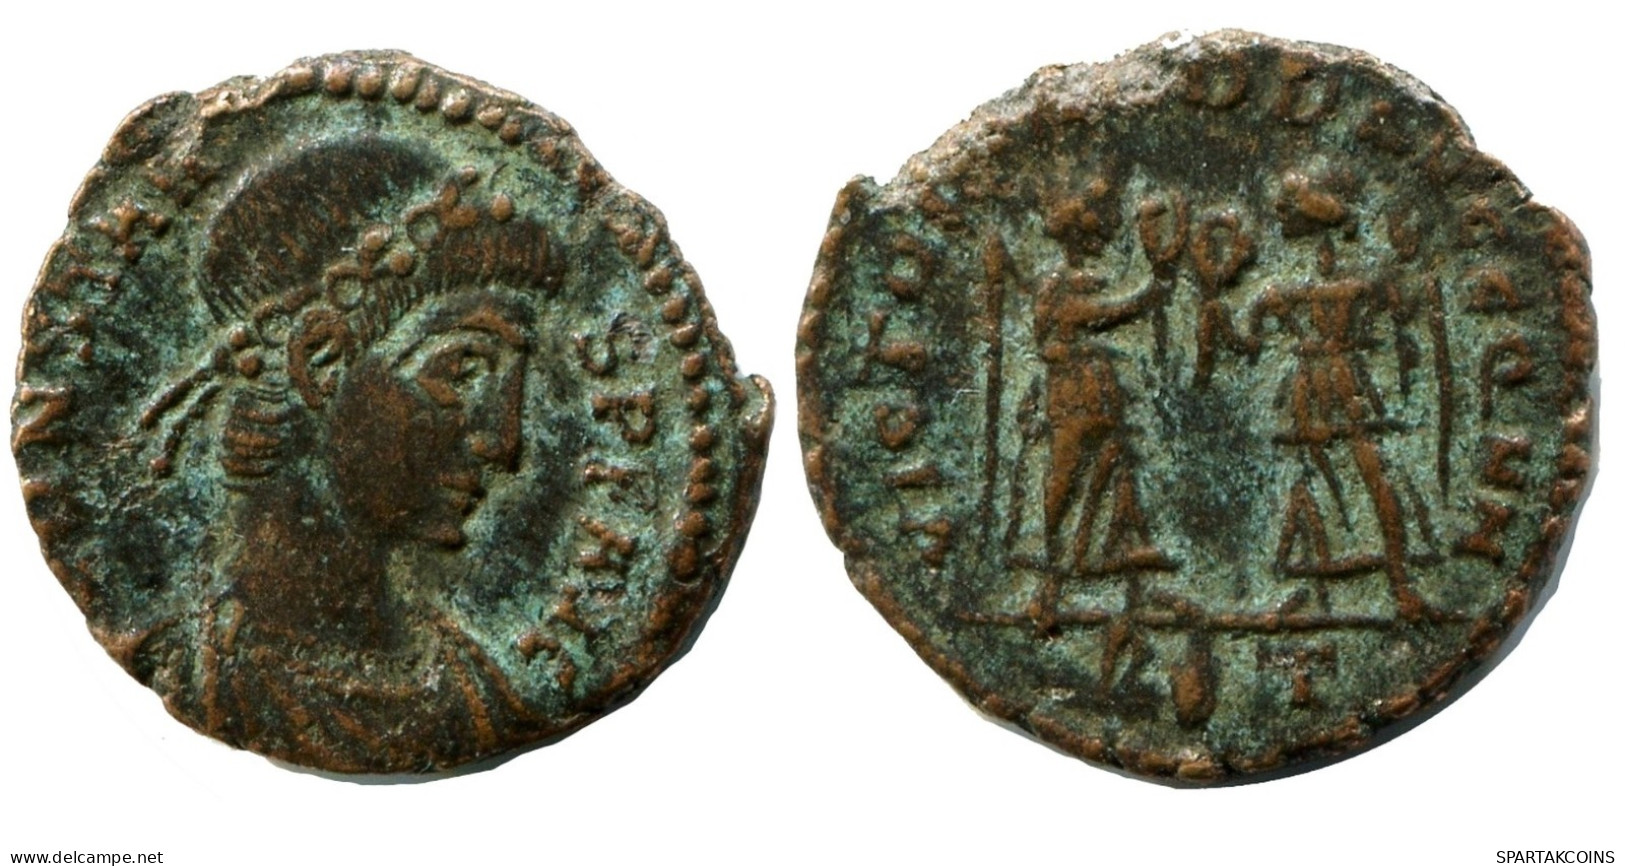 CONSTANS MINTED IN ROME ITALY FROM THE ROYAL ONTARIO MUSEUM #ANC11505.14.E.A - The Christian Empire (307 AD To 363 AD)